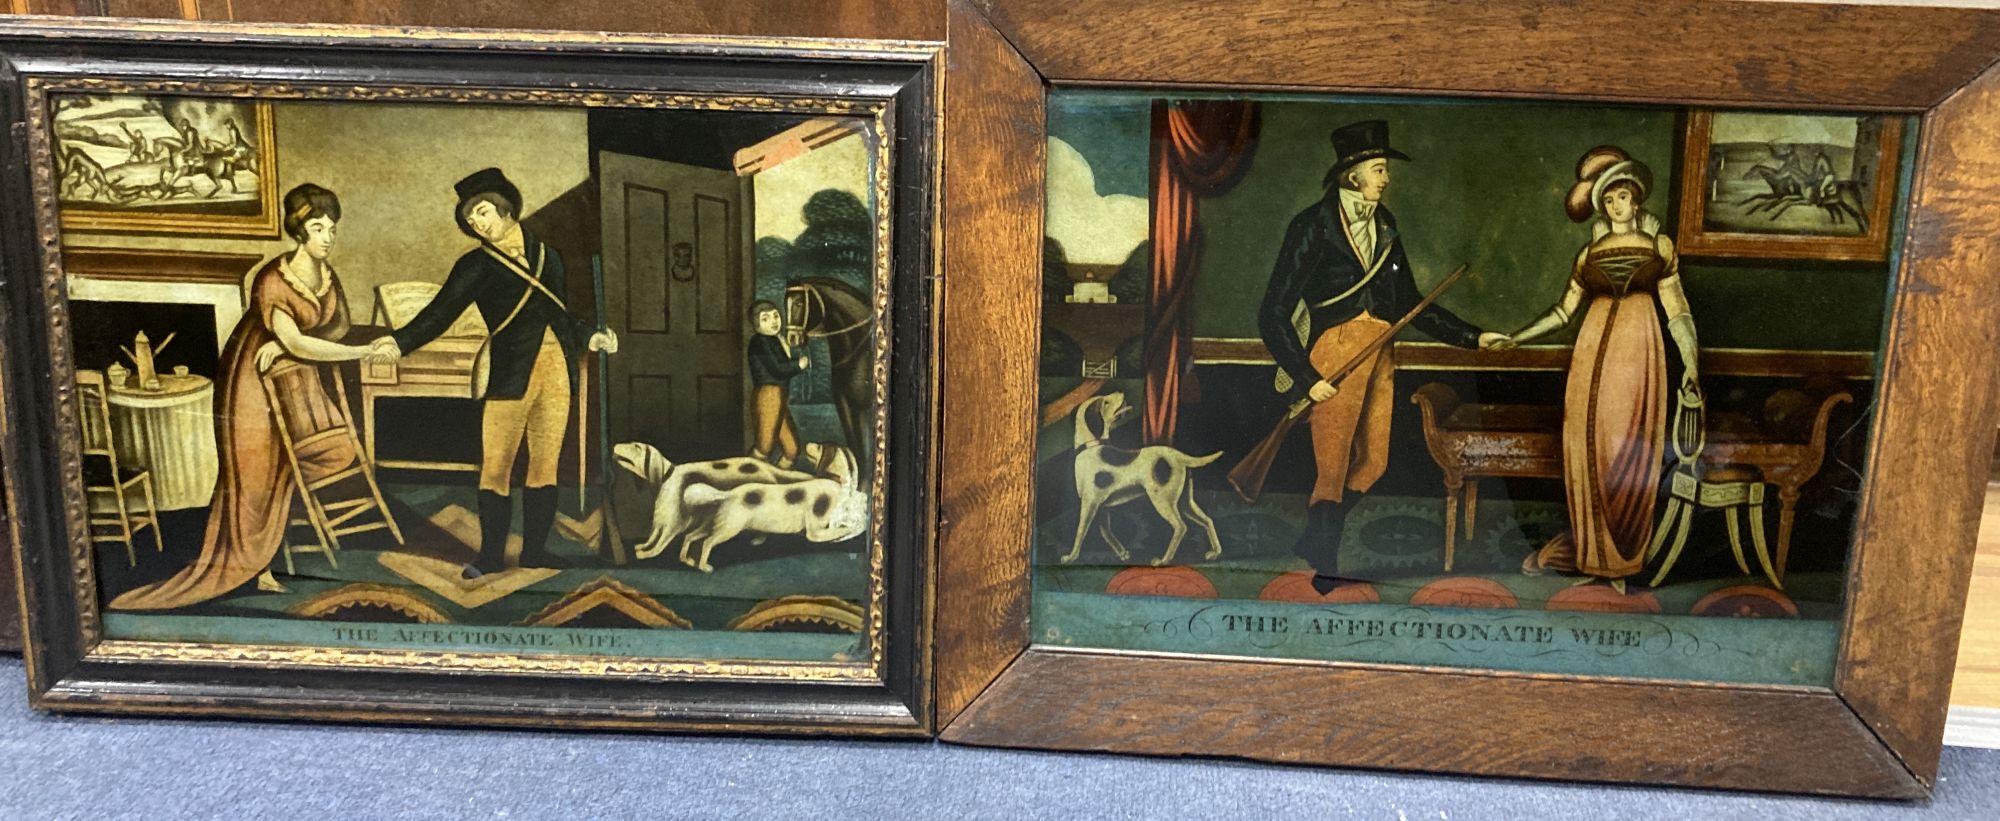 Two early 19th century coloured reverse glass prints, each titled The Affectionate Wife, 25 x 35cm and 25 x 36cm